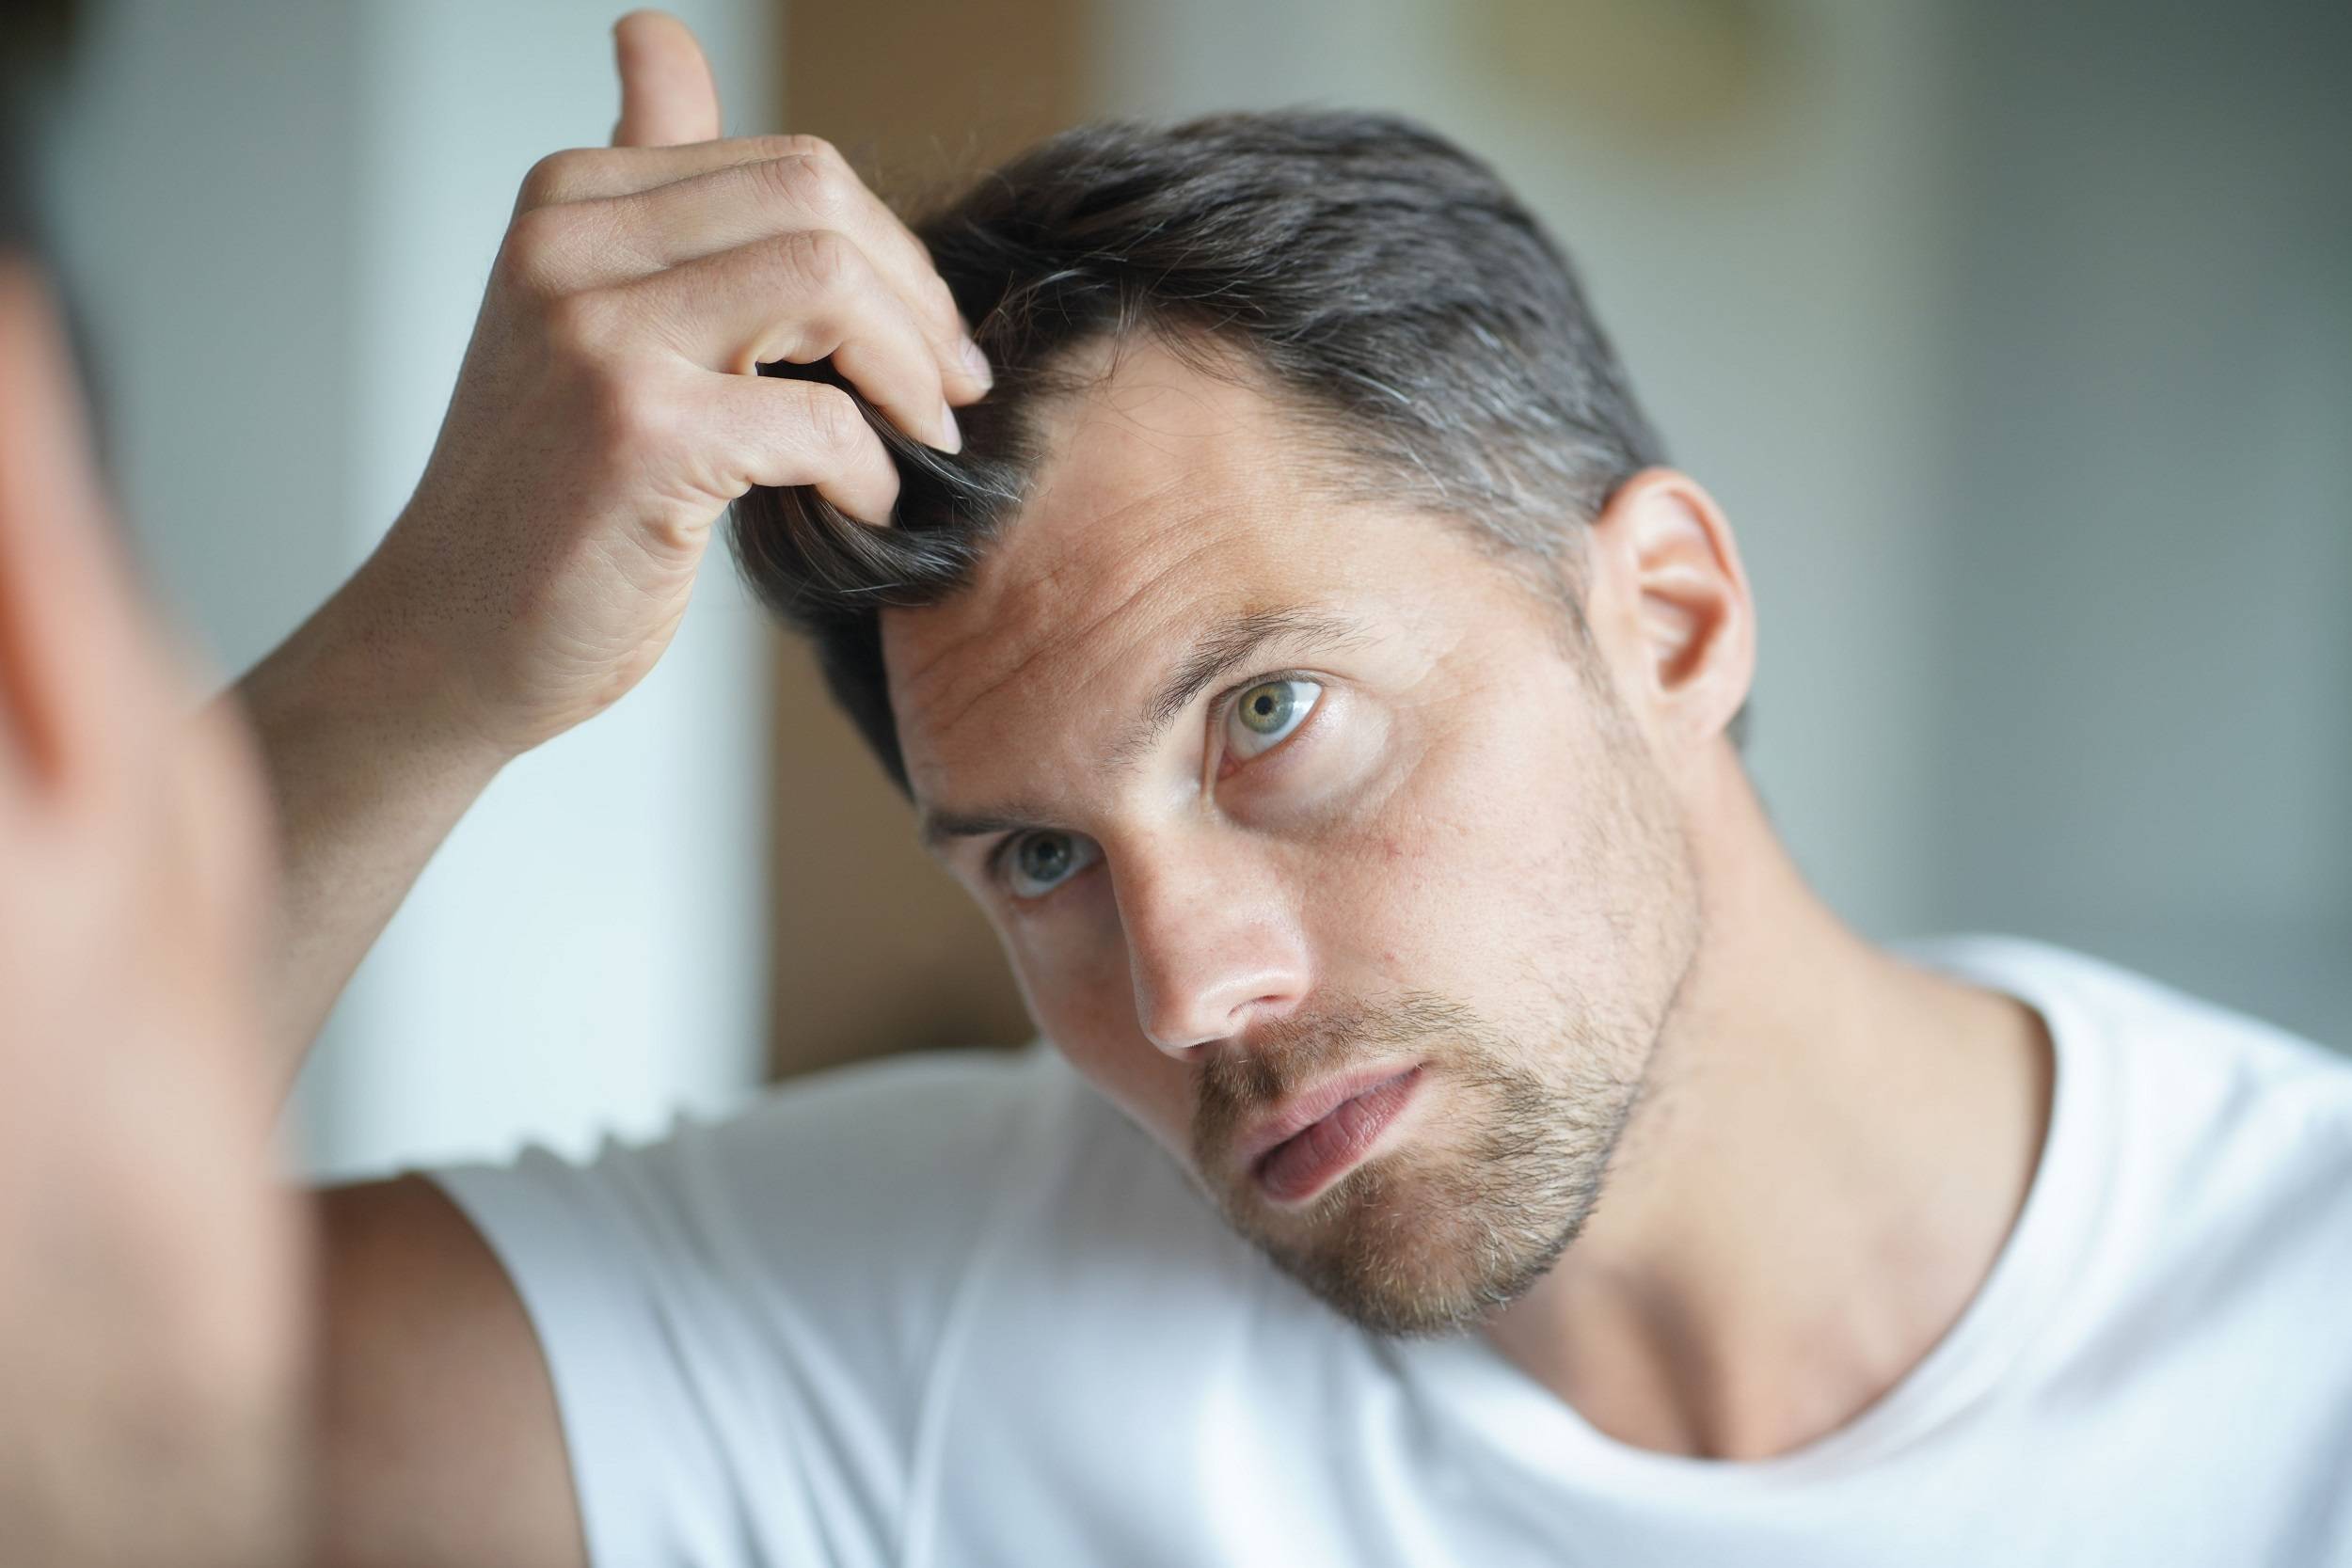 hair loss treatment for men and women